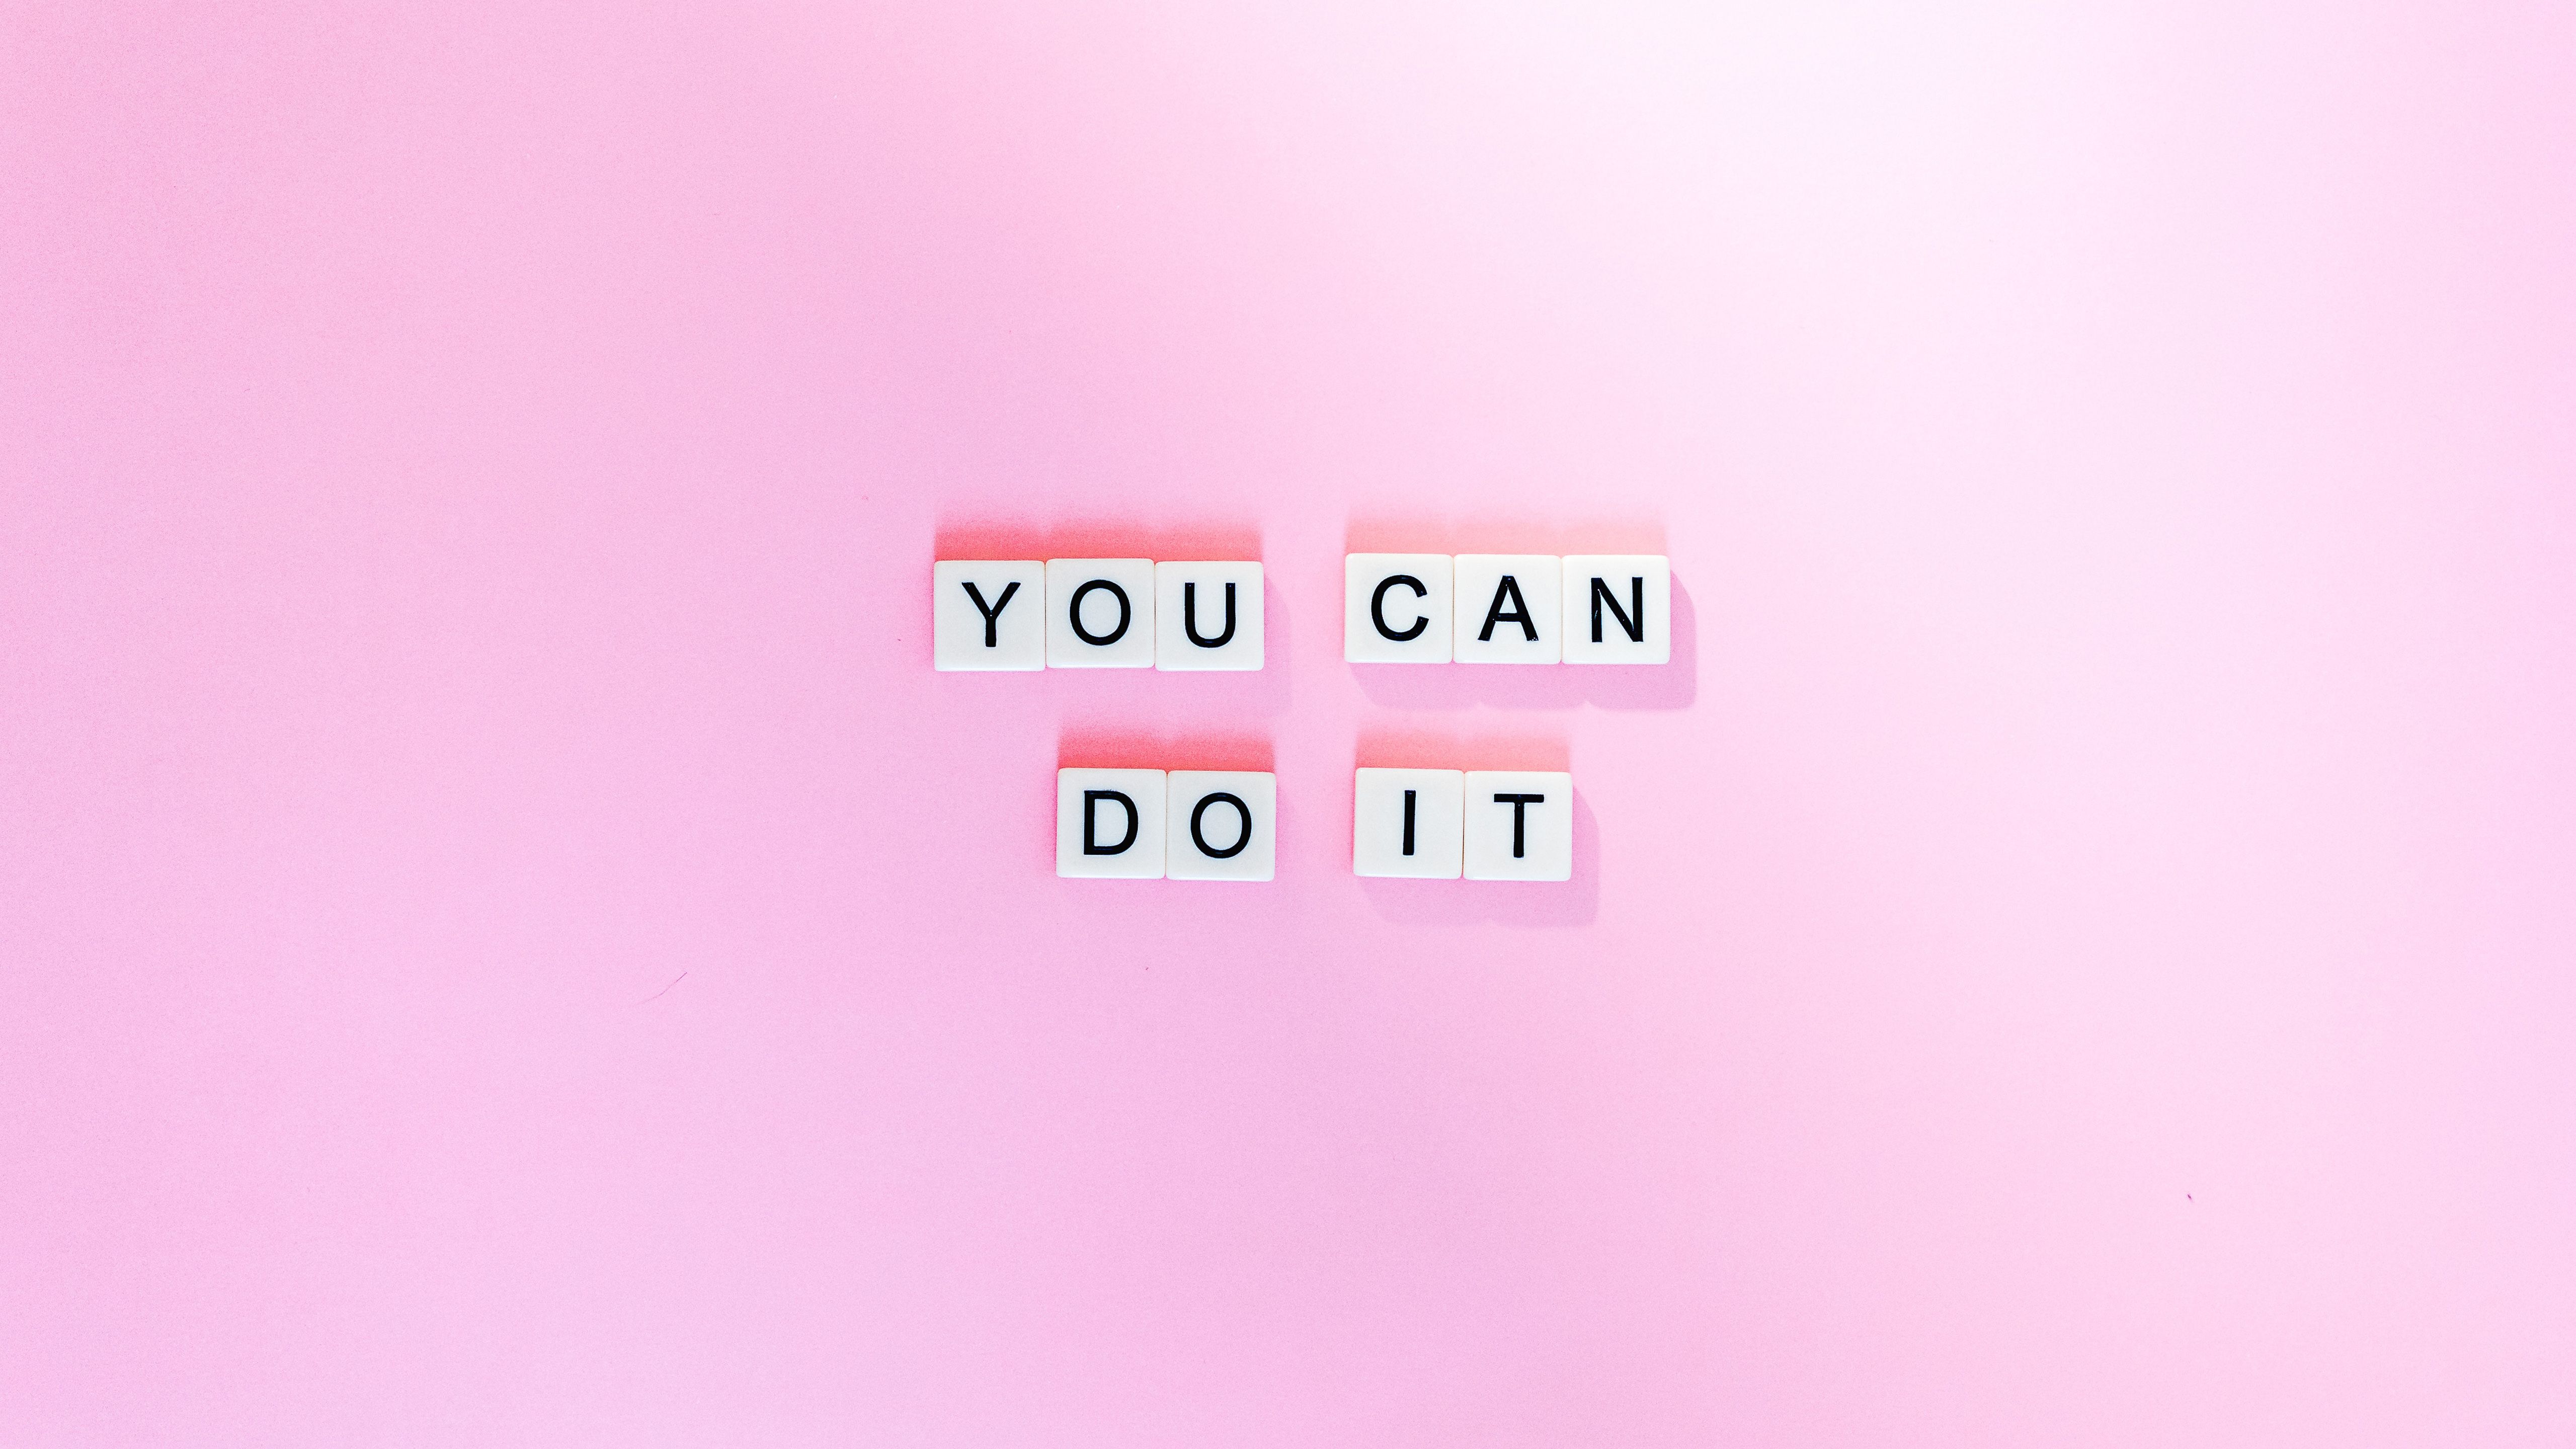 Dream and believe in yourself You can do it 4K wallpaper download